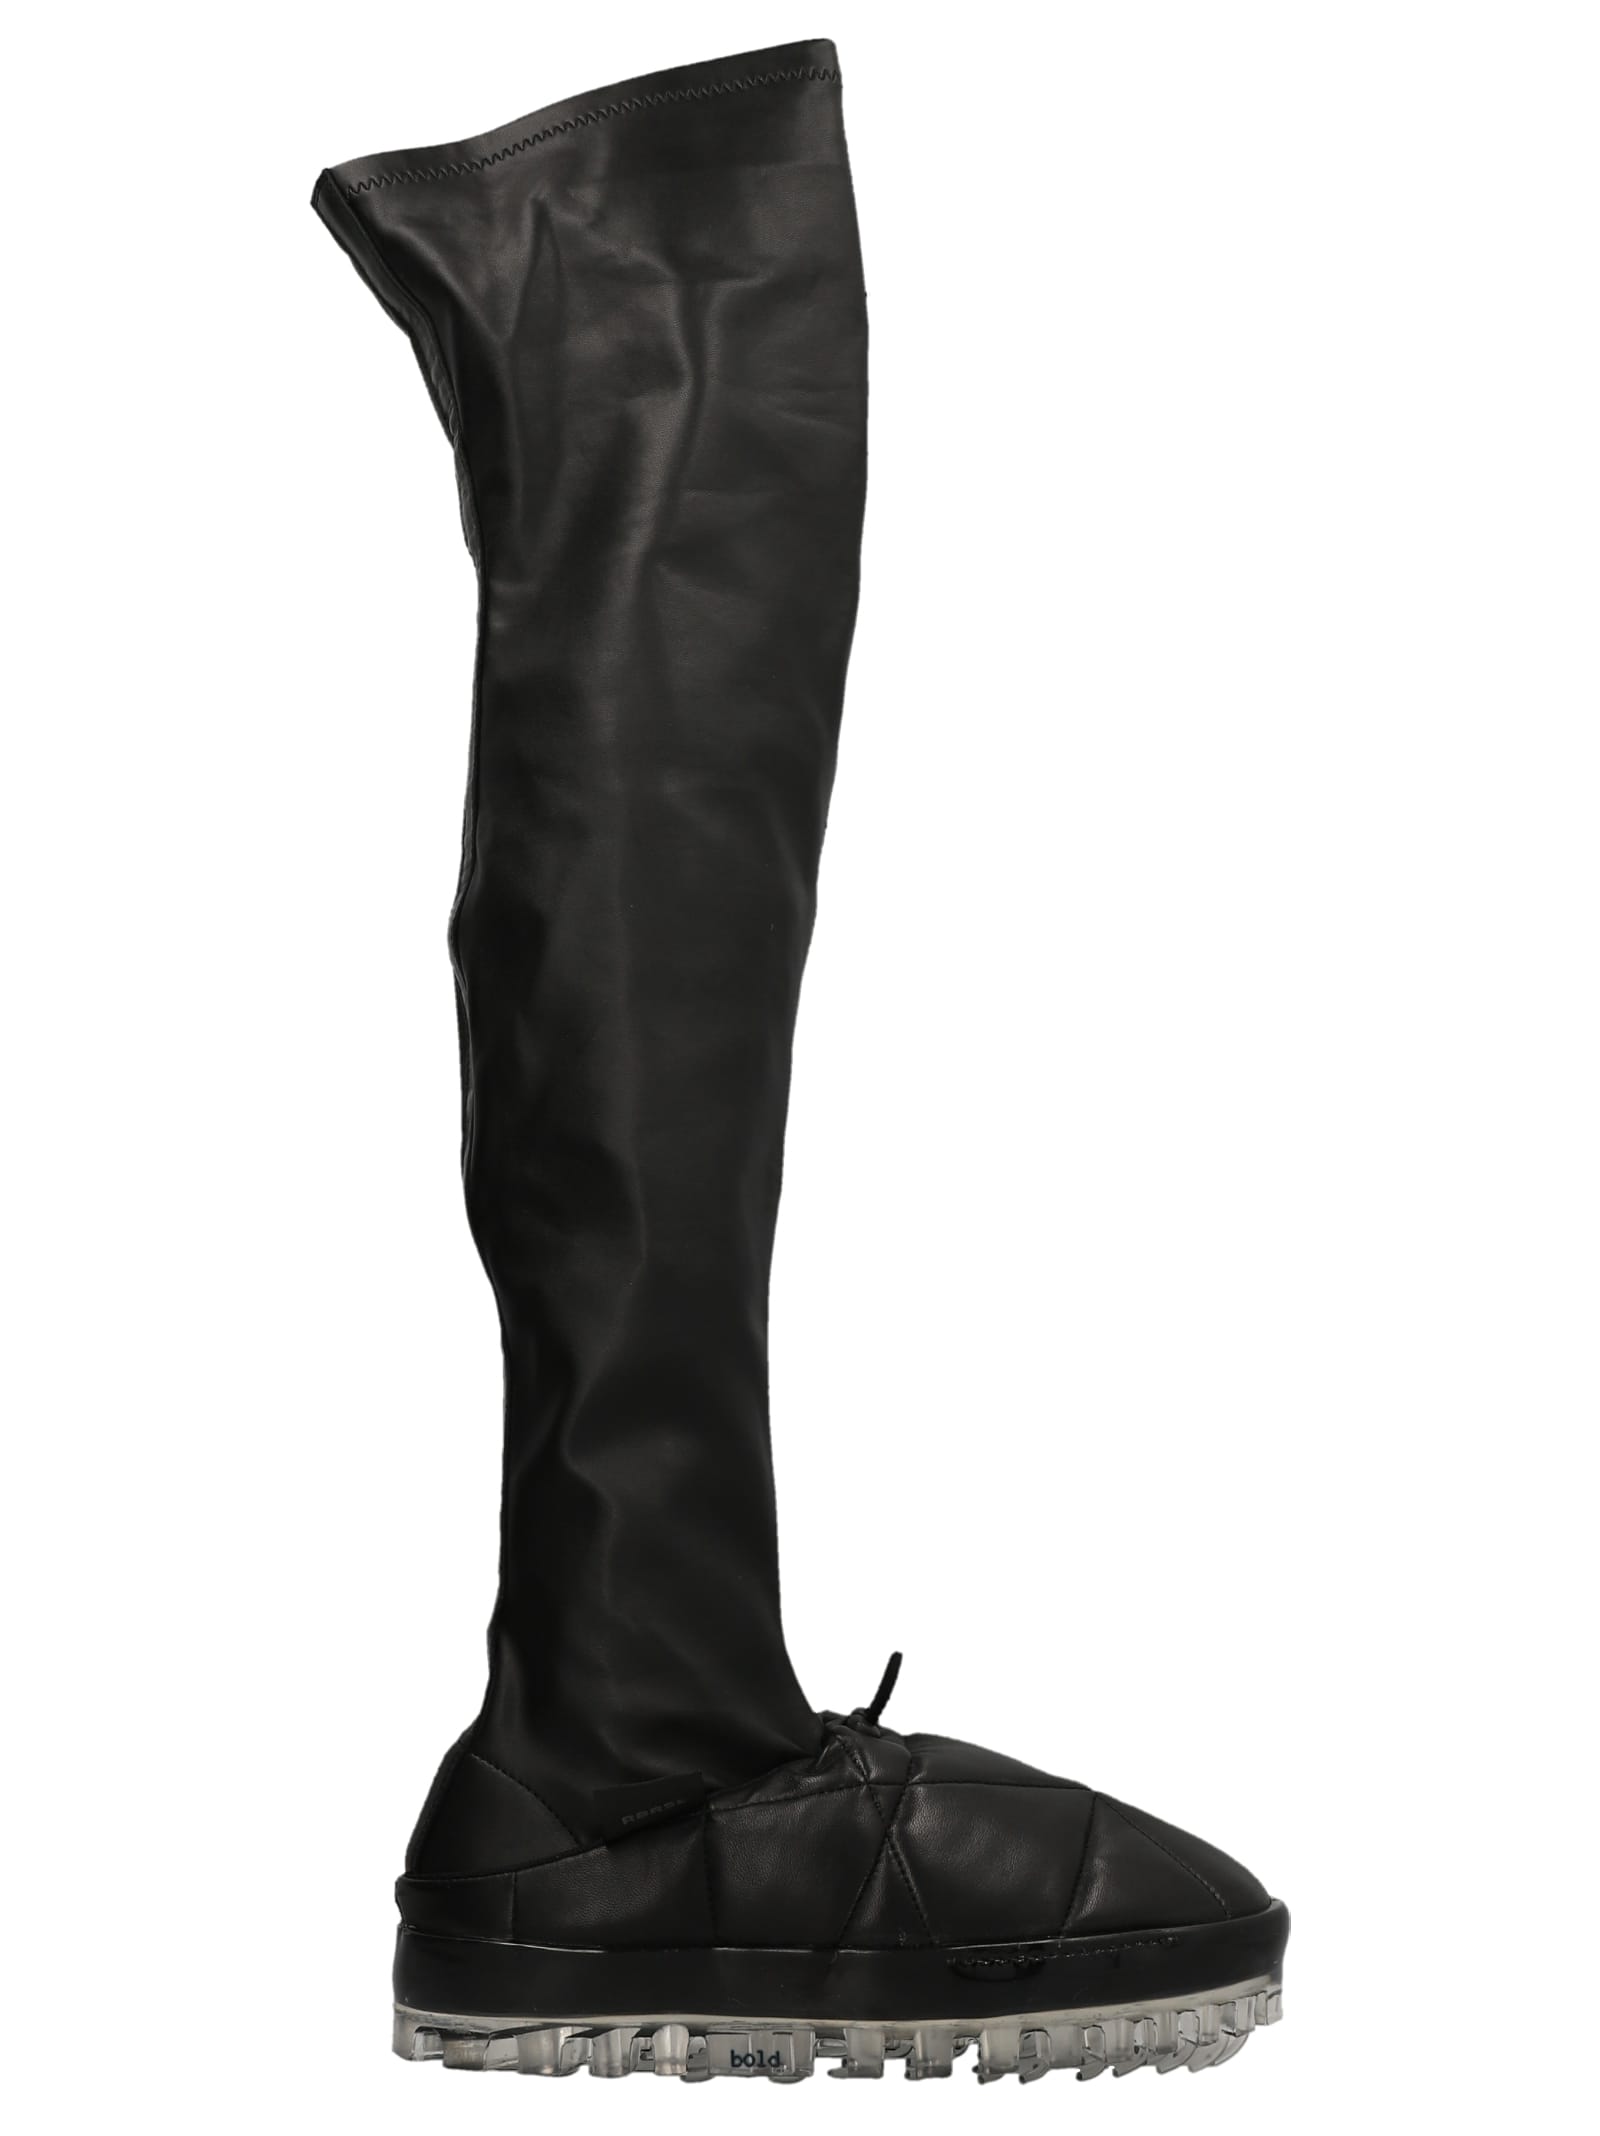 RBRSL Rubber Soul Leather Boots